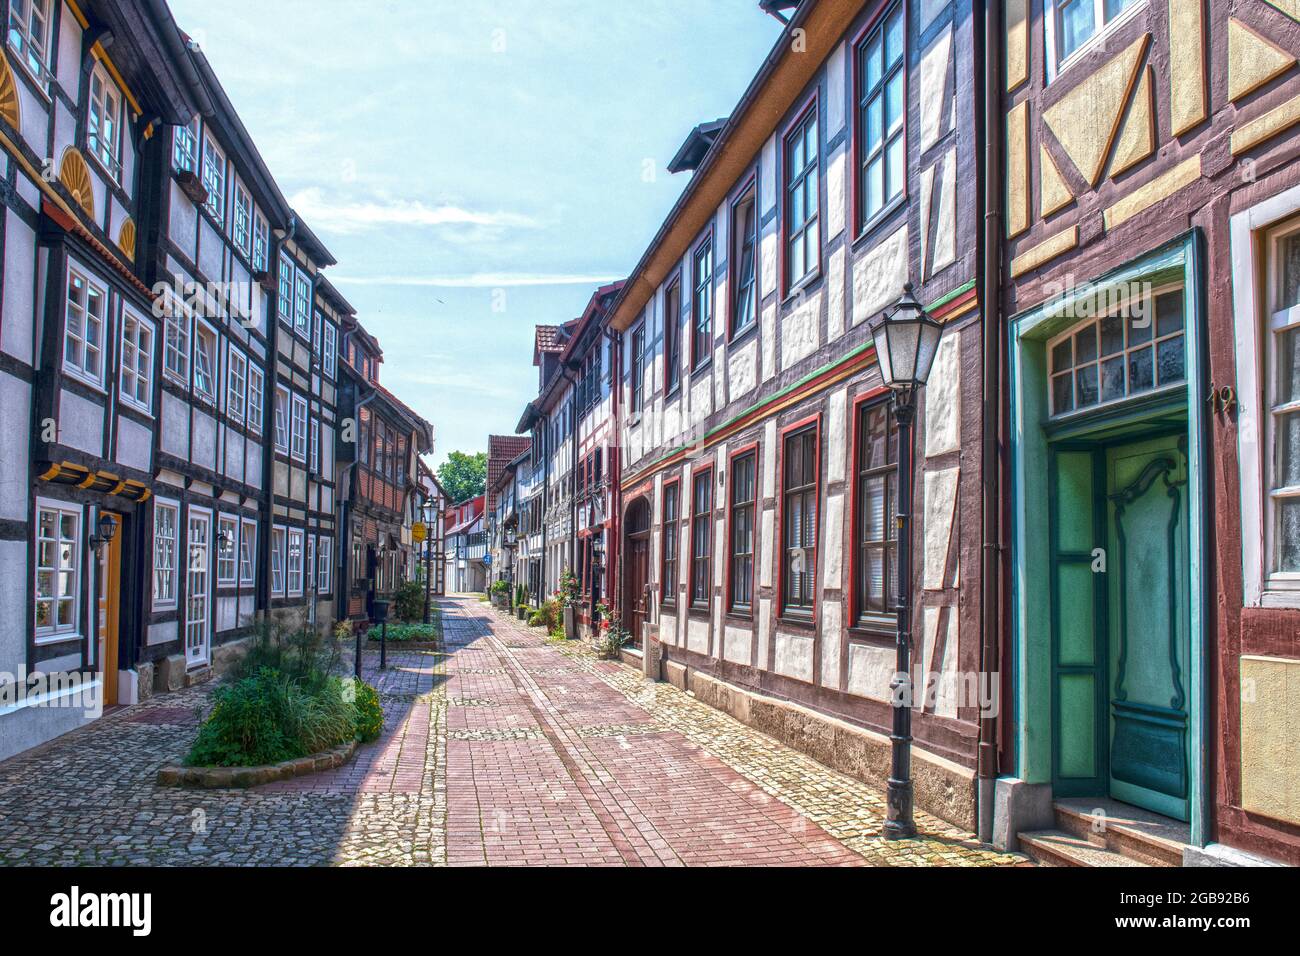 Hisâ€ oric half-timbered houses in small old town alley, Hamelin, Lower Saxony, Germany Stock Photo